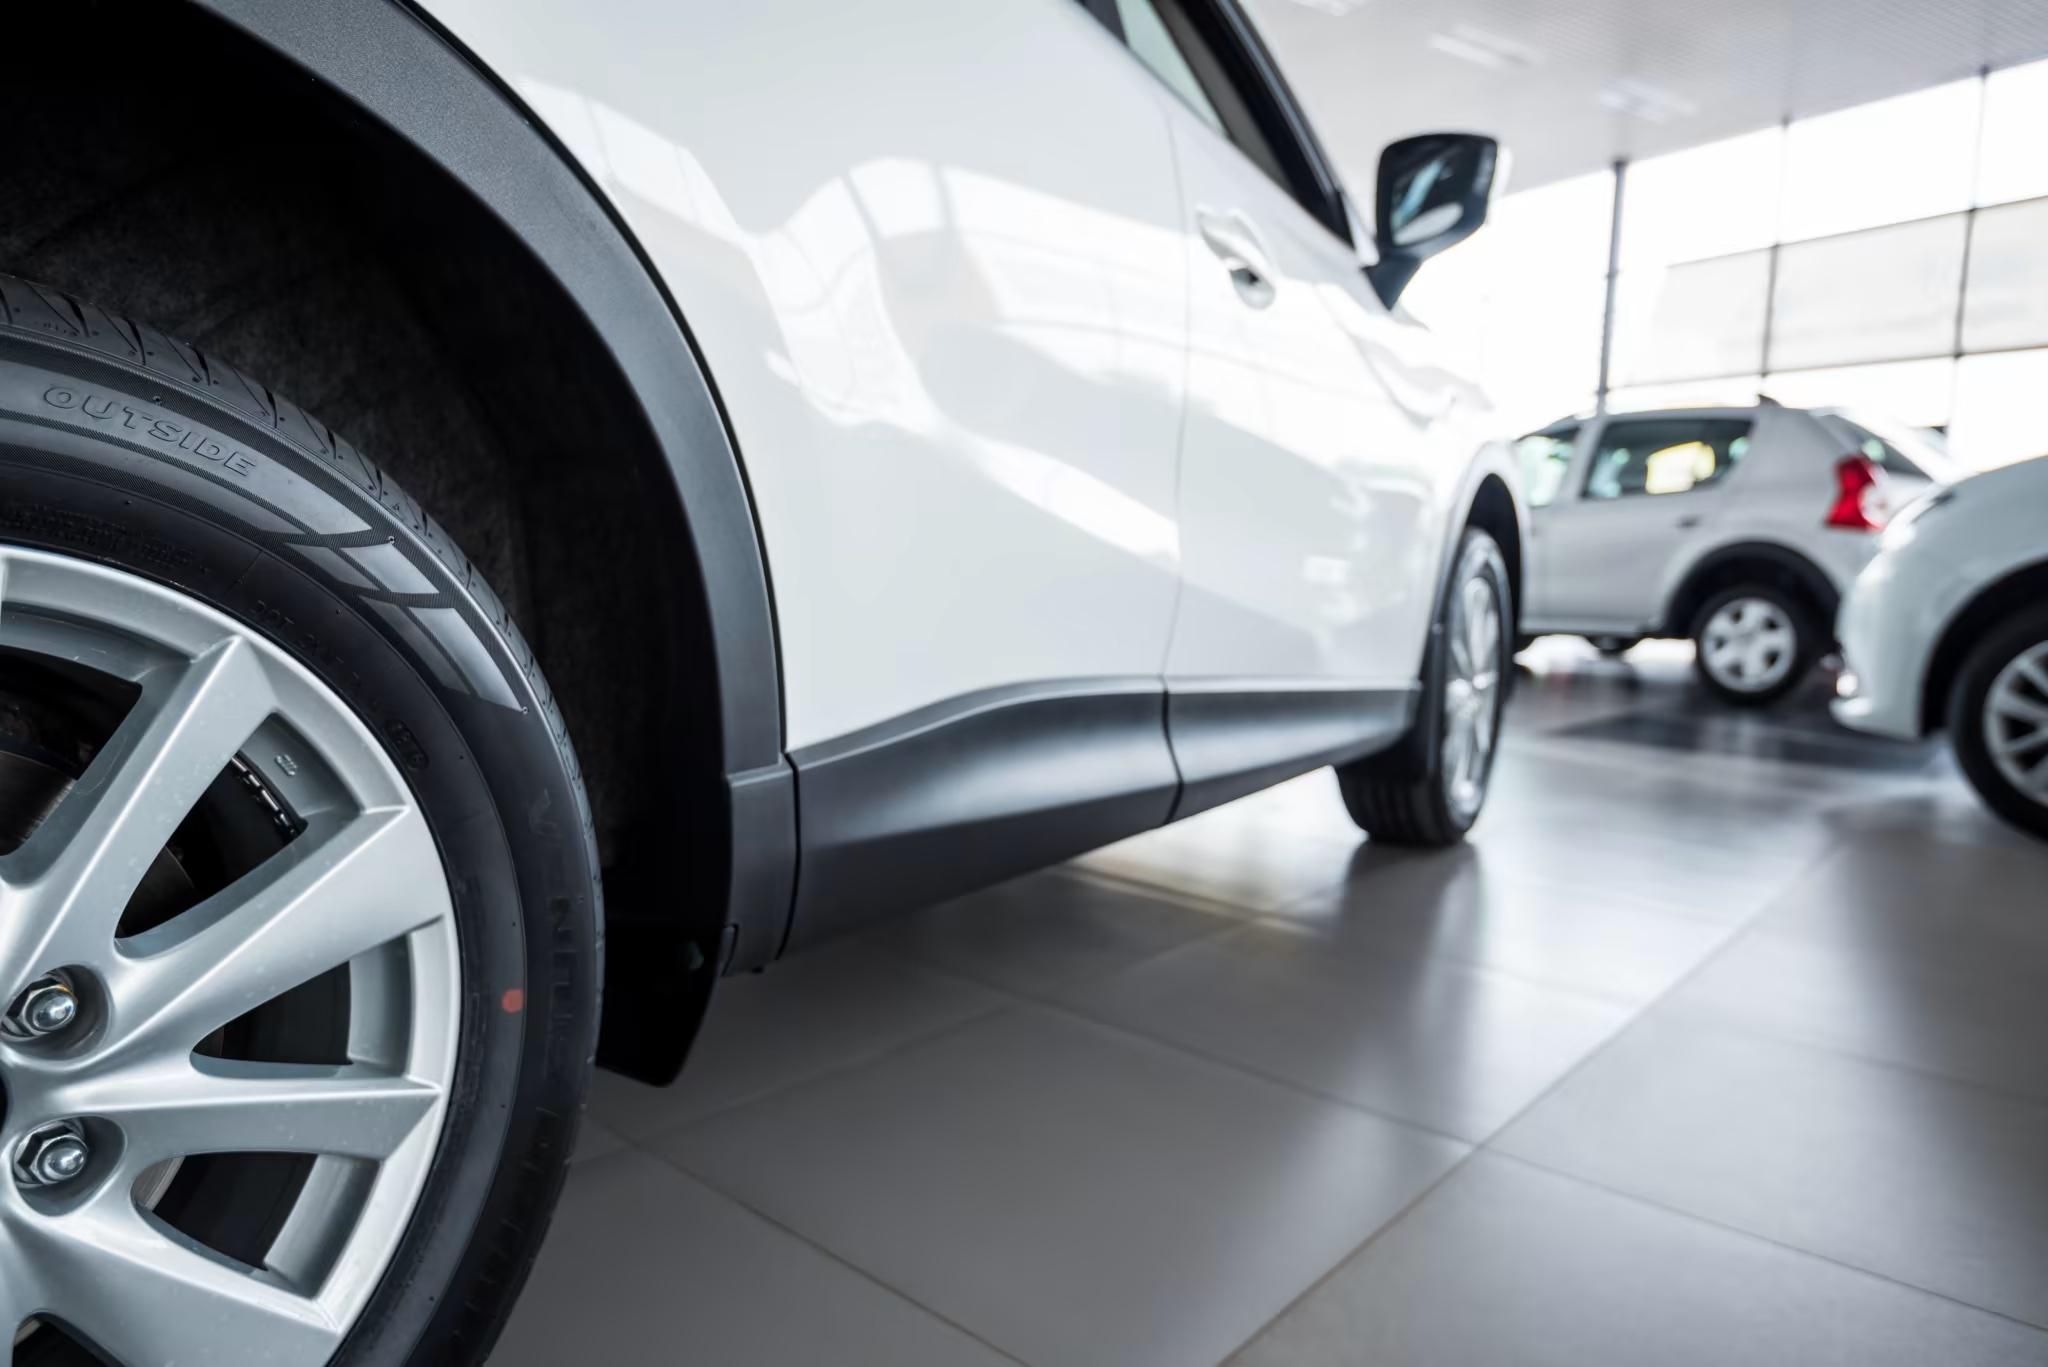 up close image of car and floor in car dealership highlighting how clean the facility is